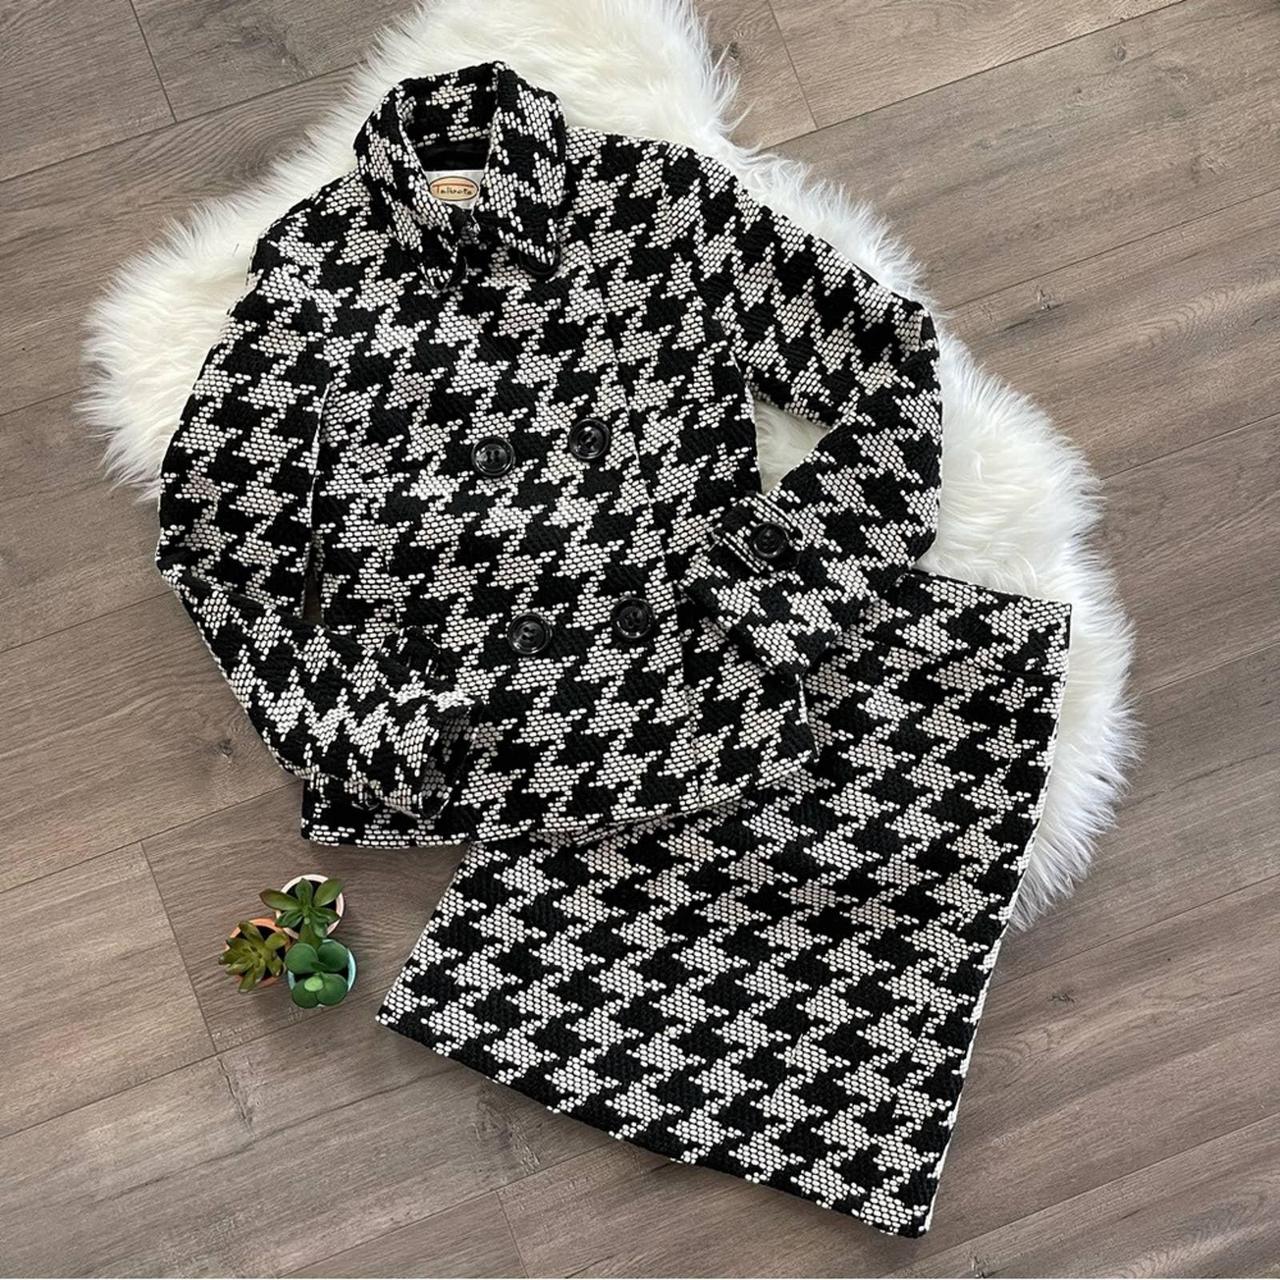 Zip up Black white checkered bag with beige lining - Depop